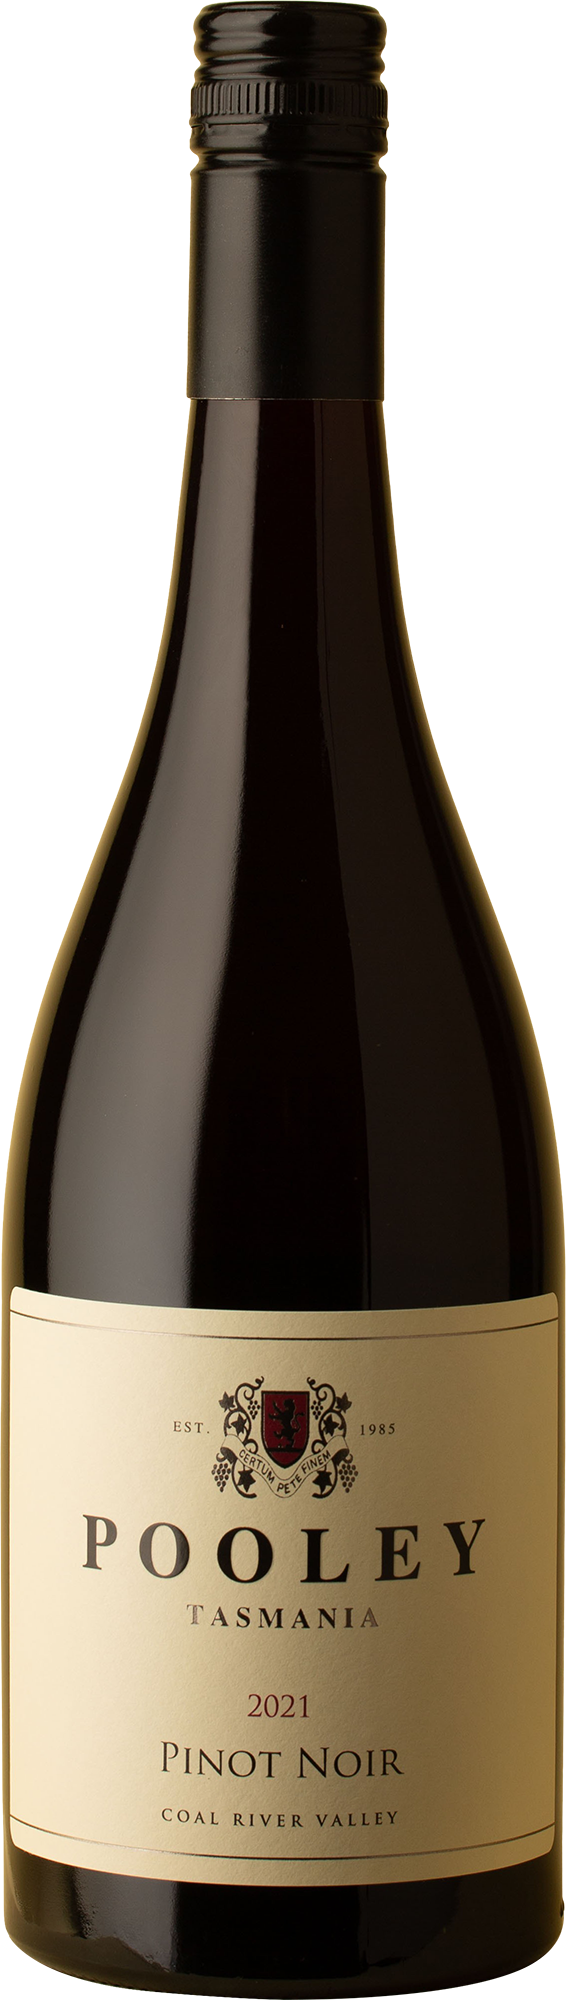 Pooley - Pinot Noir 2021 Red Wine